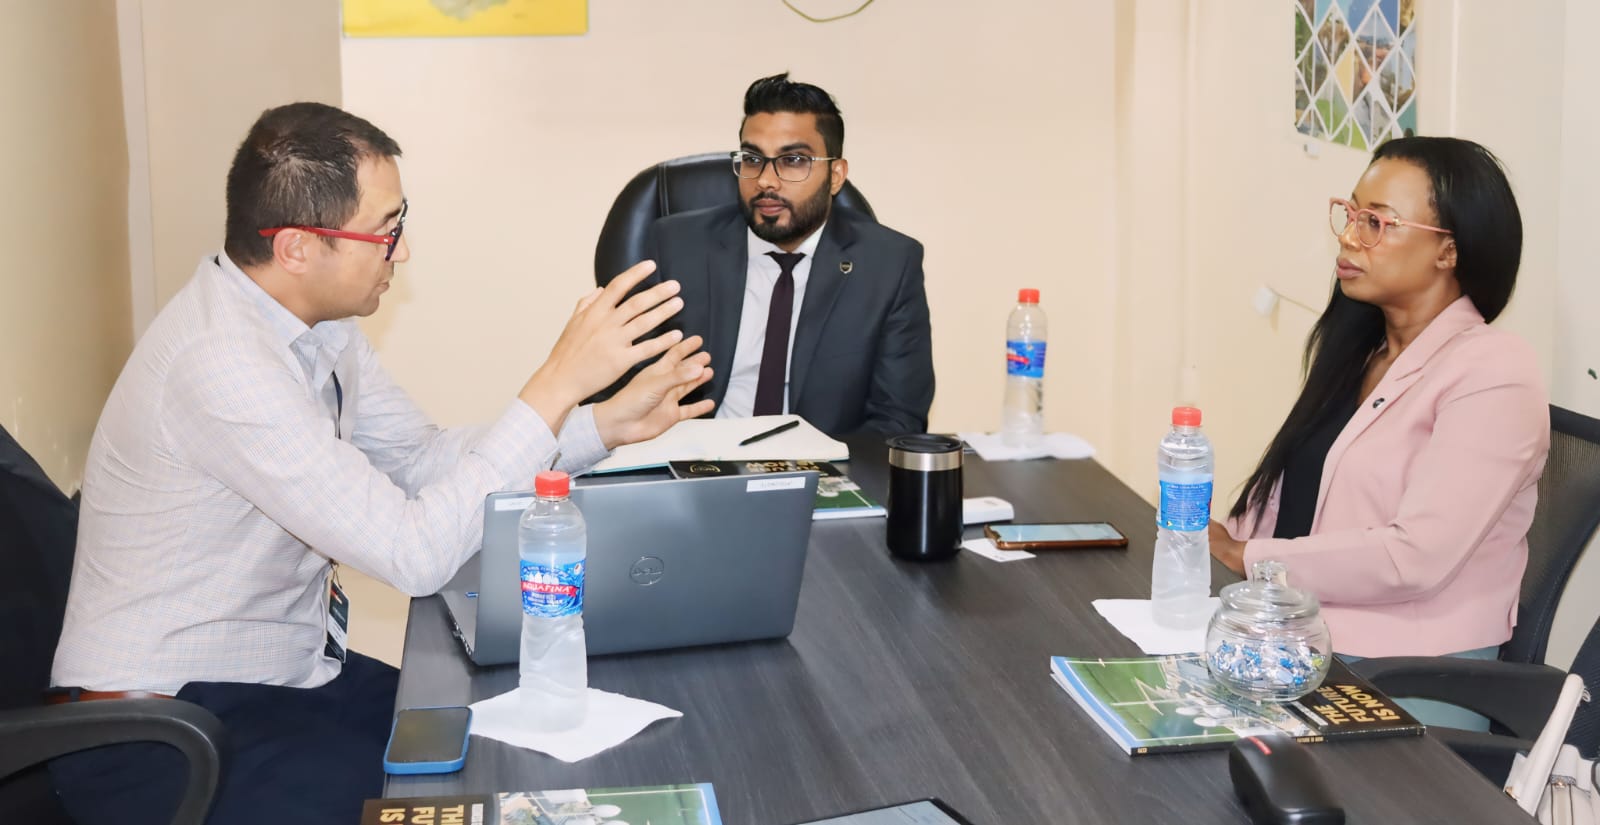 GCCI meets with Columbian training and certification company looking to set up local offices